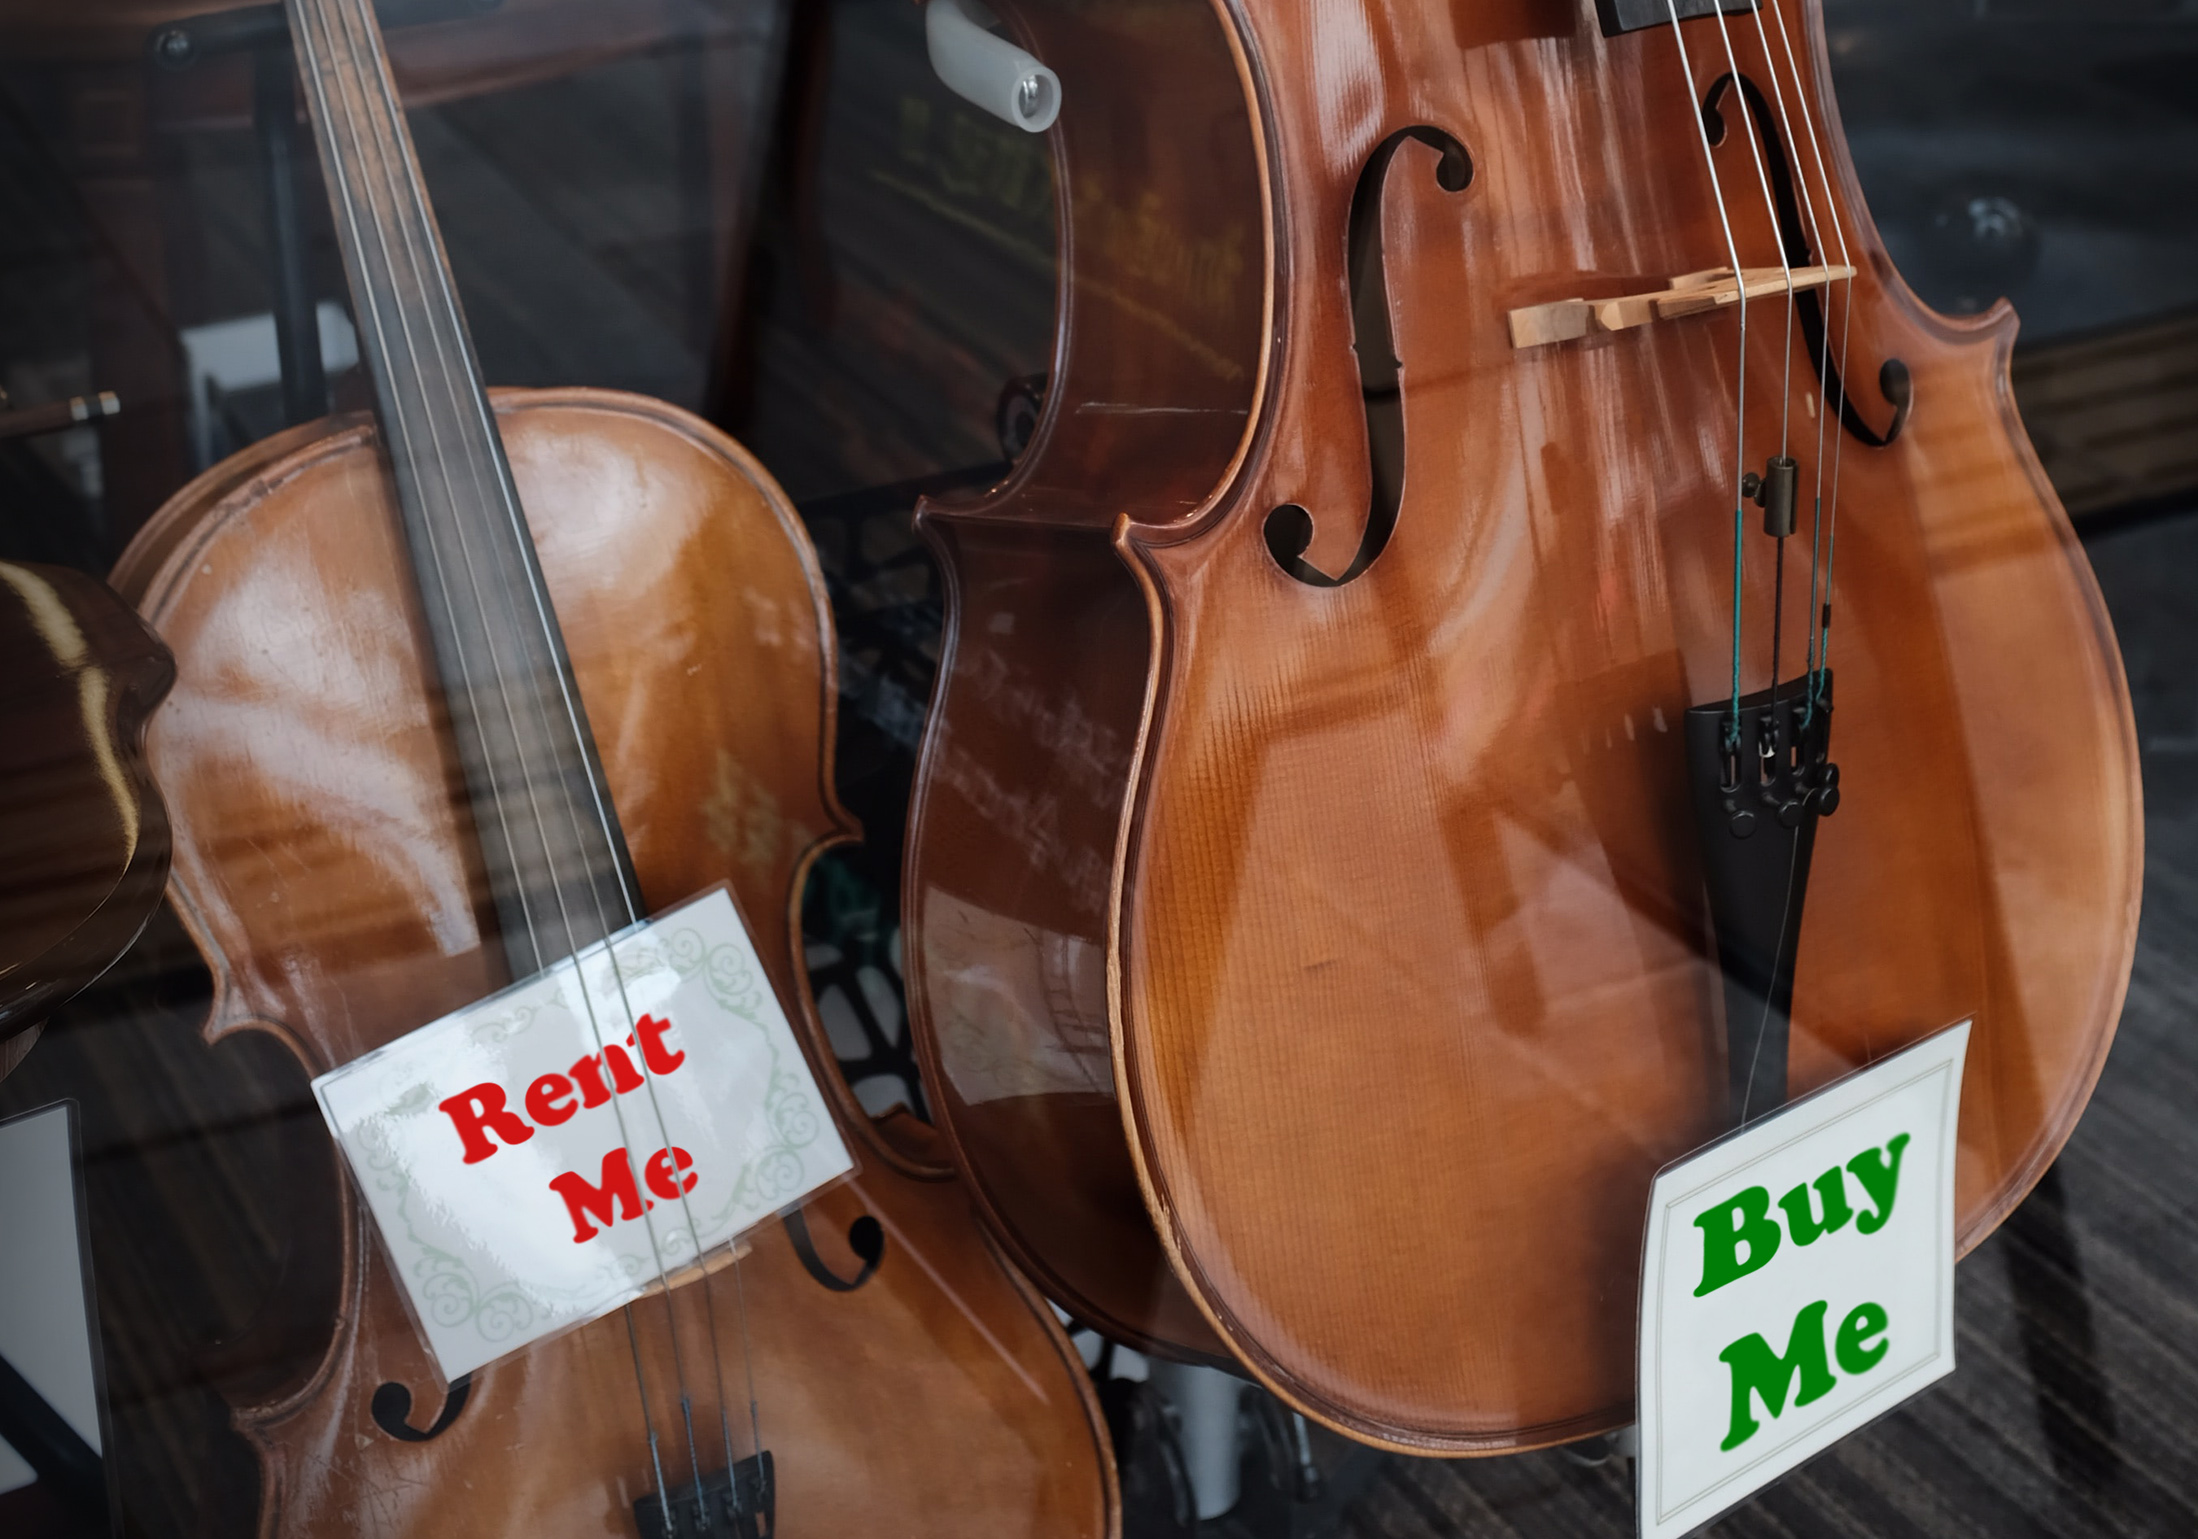 violin and cello in shop window with rent me and buy me signs